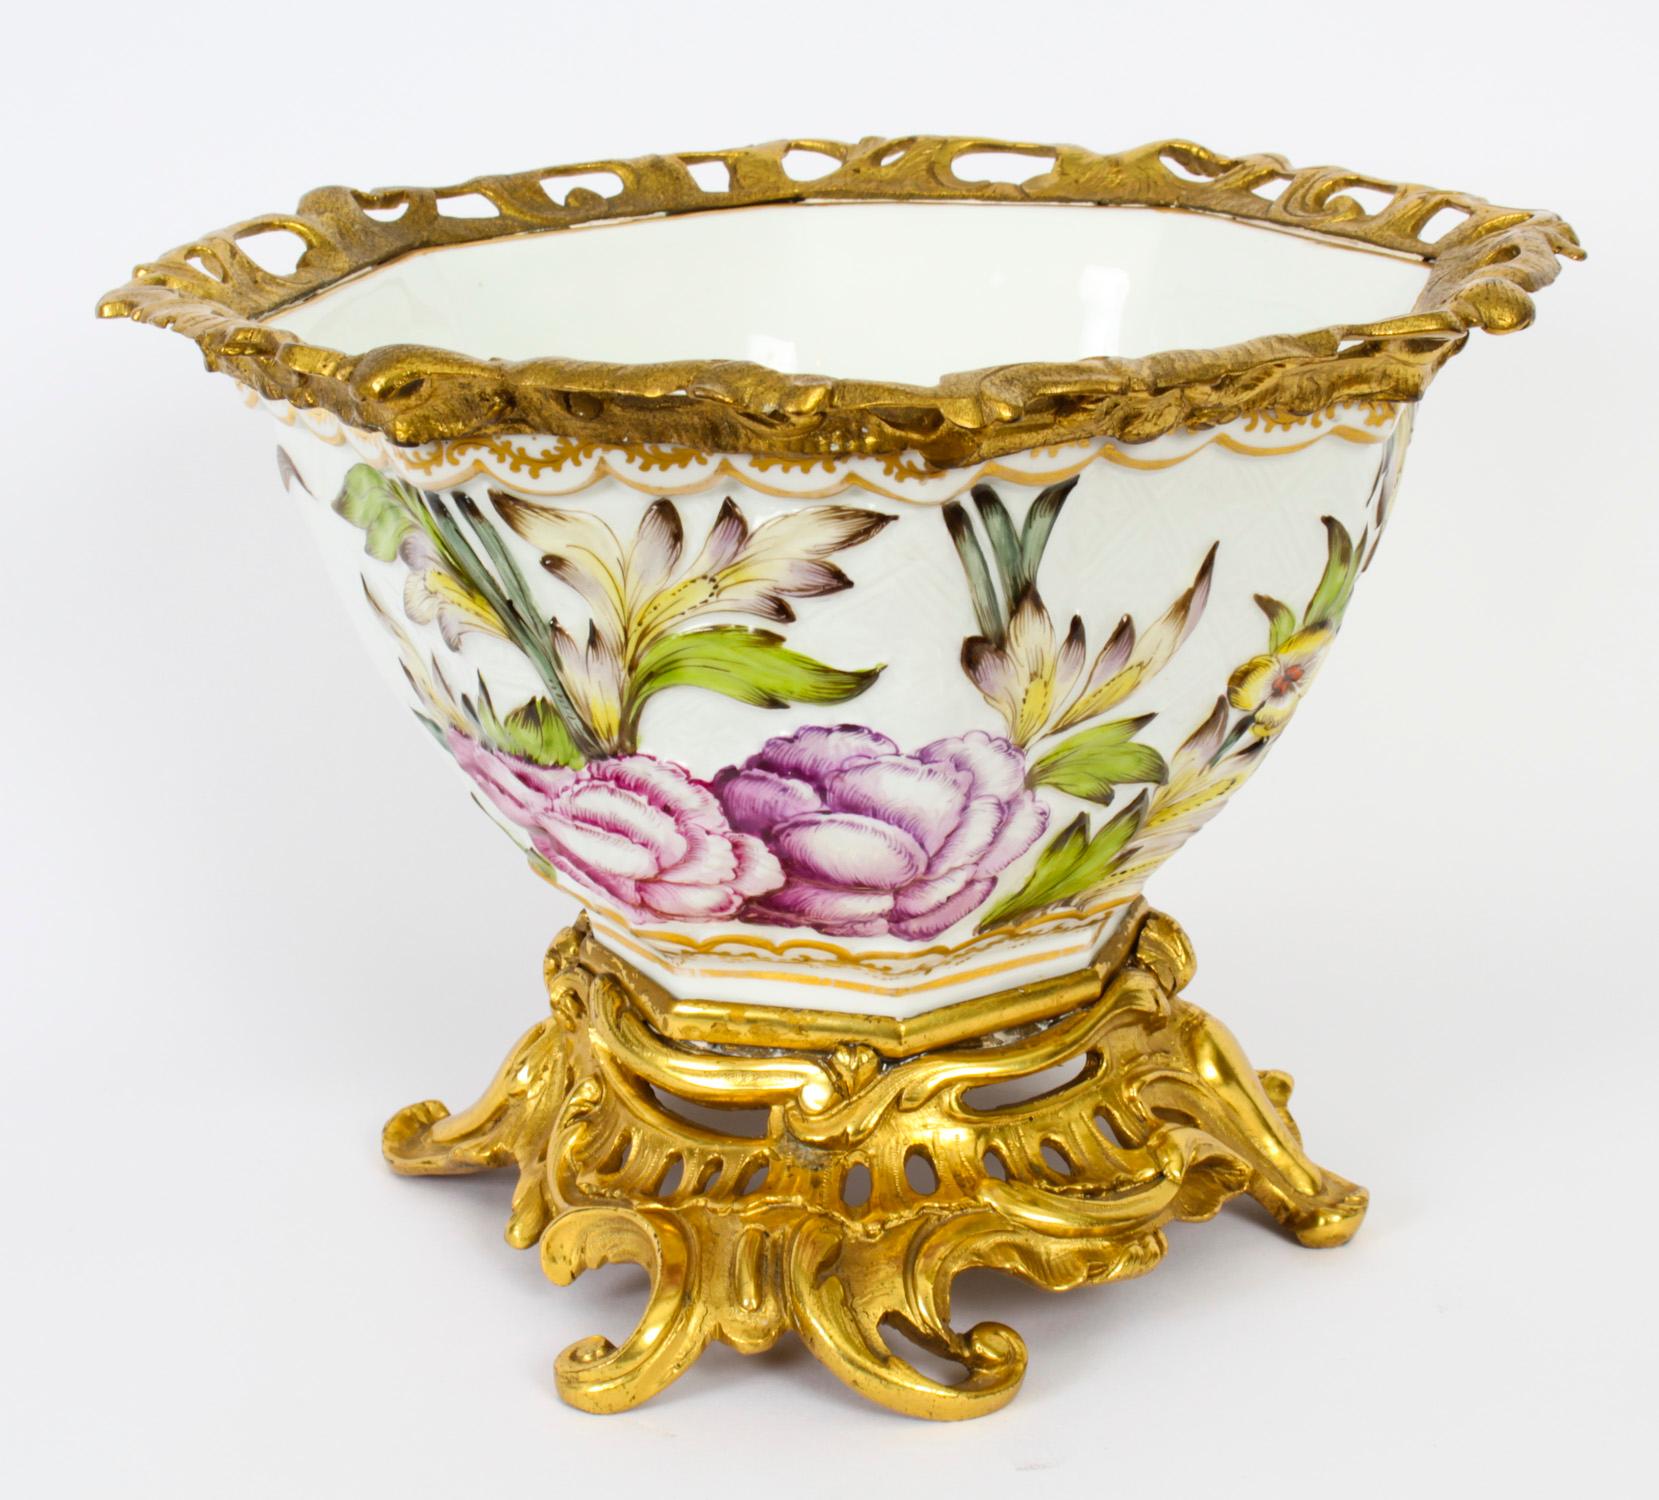 This is a fine antique French Samson porcelain centrepiece, Circa 1860 in date.
 
The octagonal shaped centrepiece features a colourful relief body decorated with flower sprays and a Chinese dragon. It is raised on a heavy set pierced and scrolled